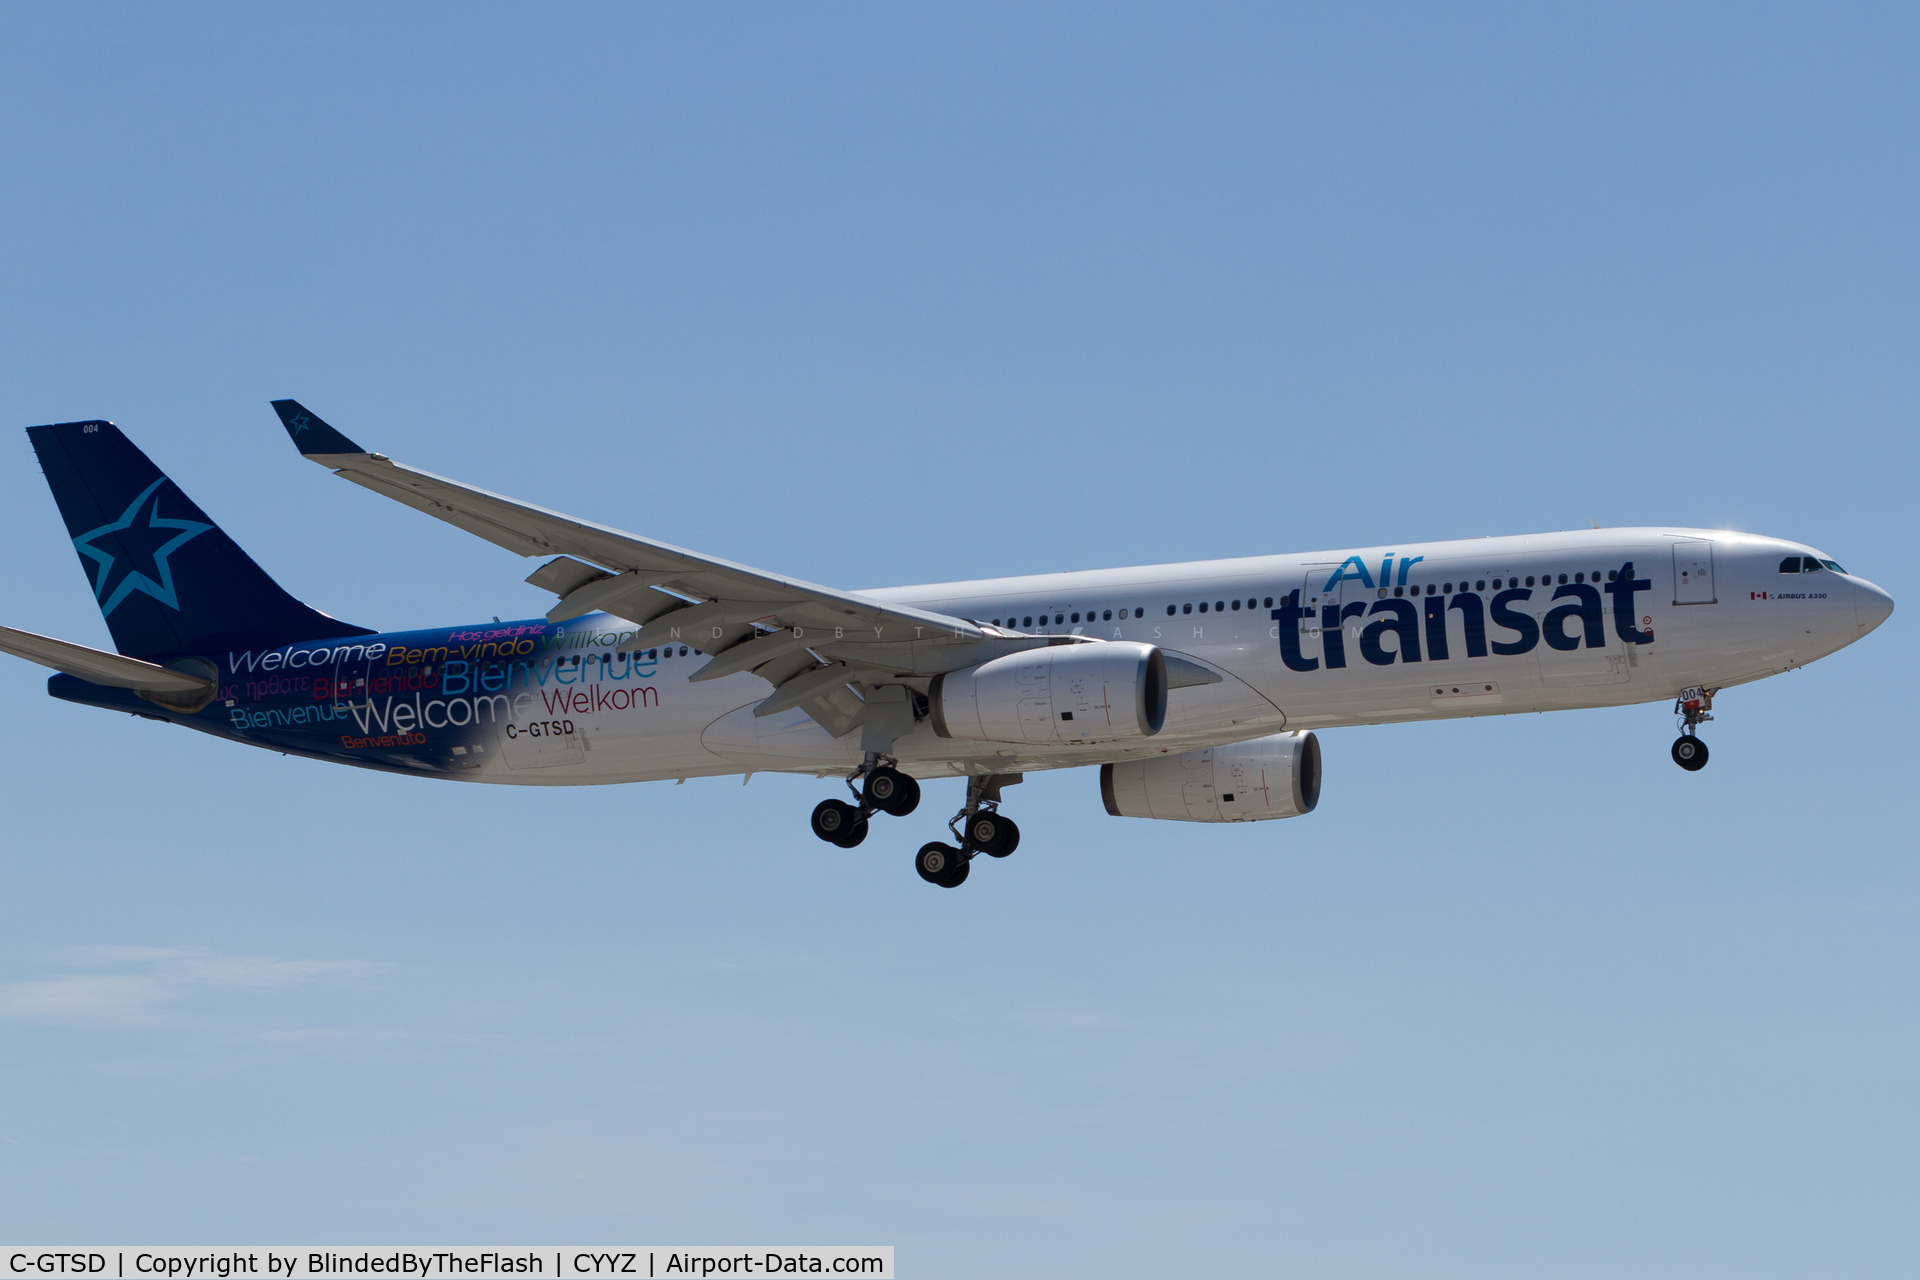 C-GTSD, 2001 Airbus A330-343X C/N 407, On short final for runway 23 at Toronto Pearson